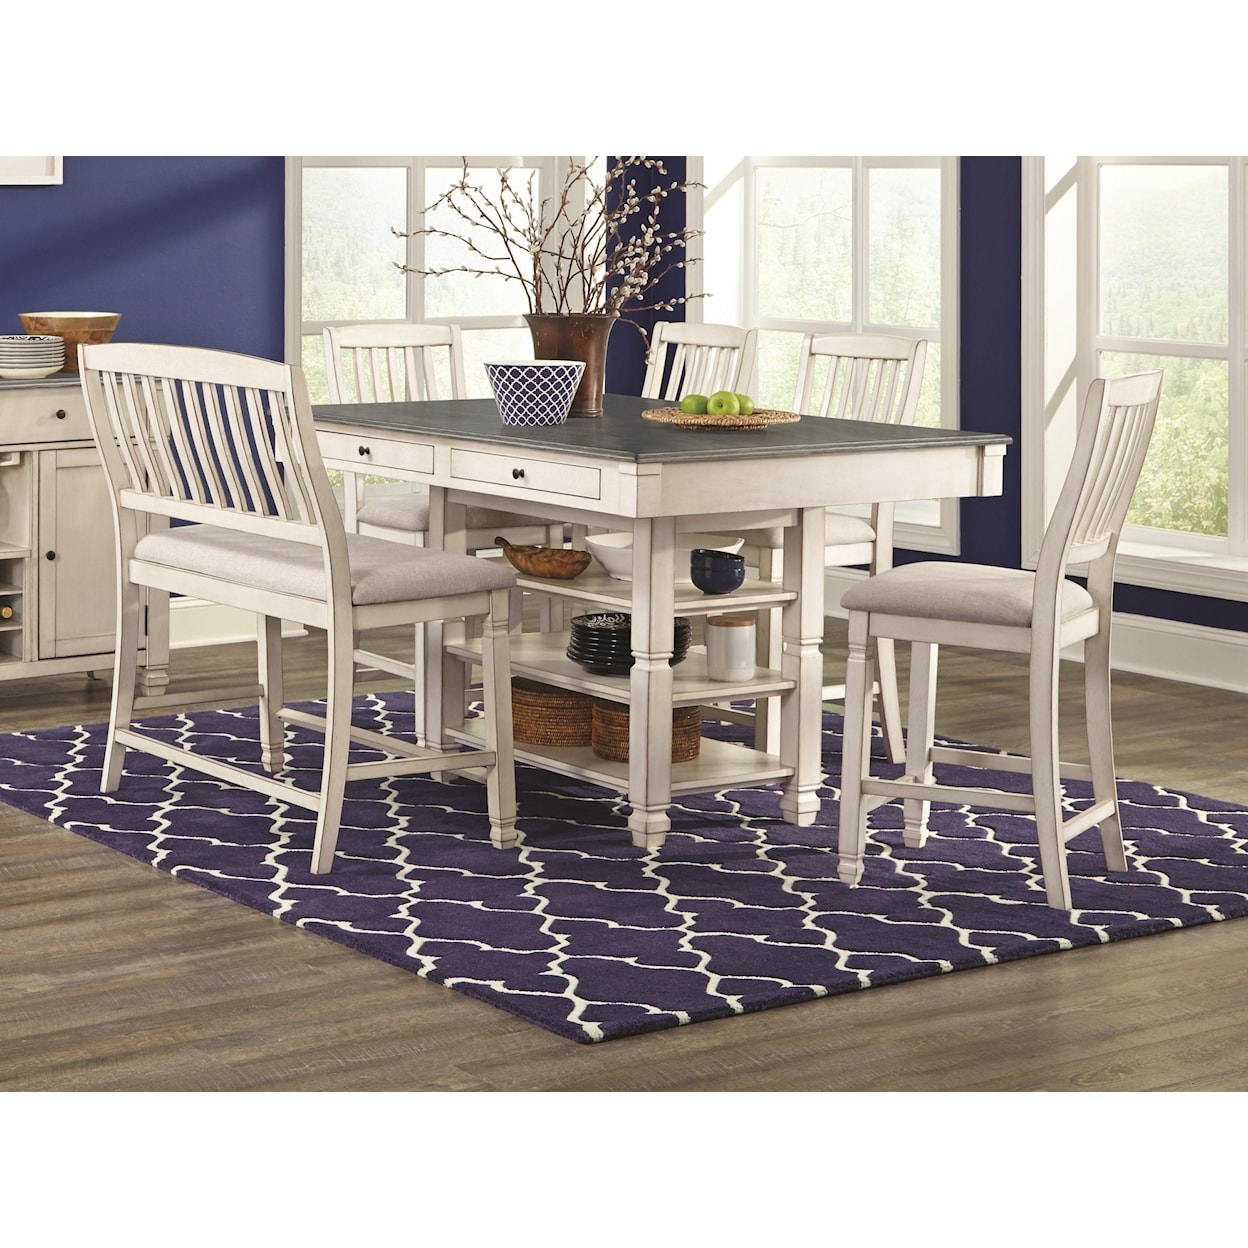 Lifestyle Crafton Counter Height Table with 4 Stools and Bench